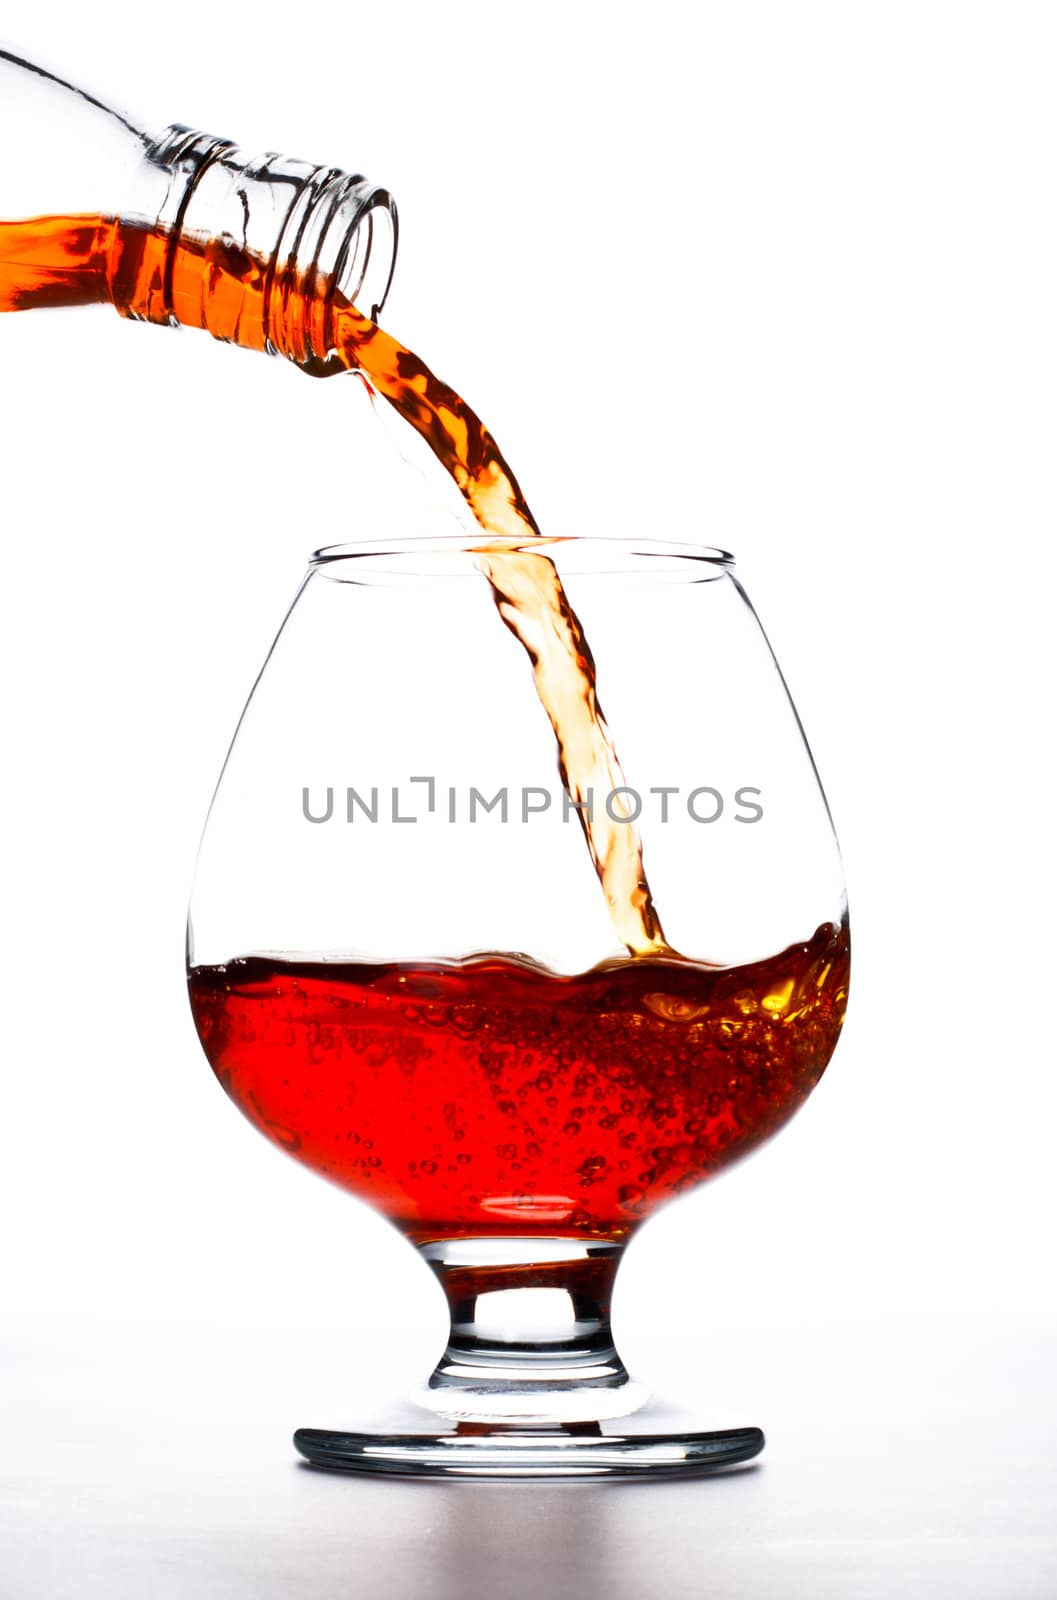 cognac pour into the glass over white background